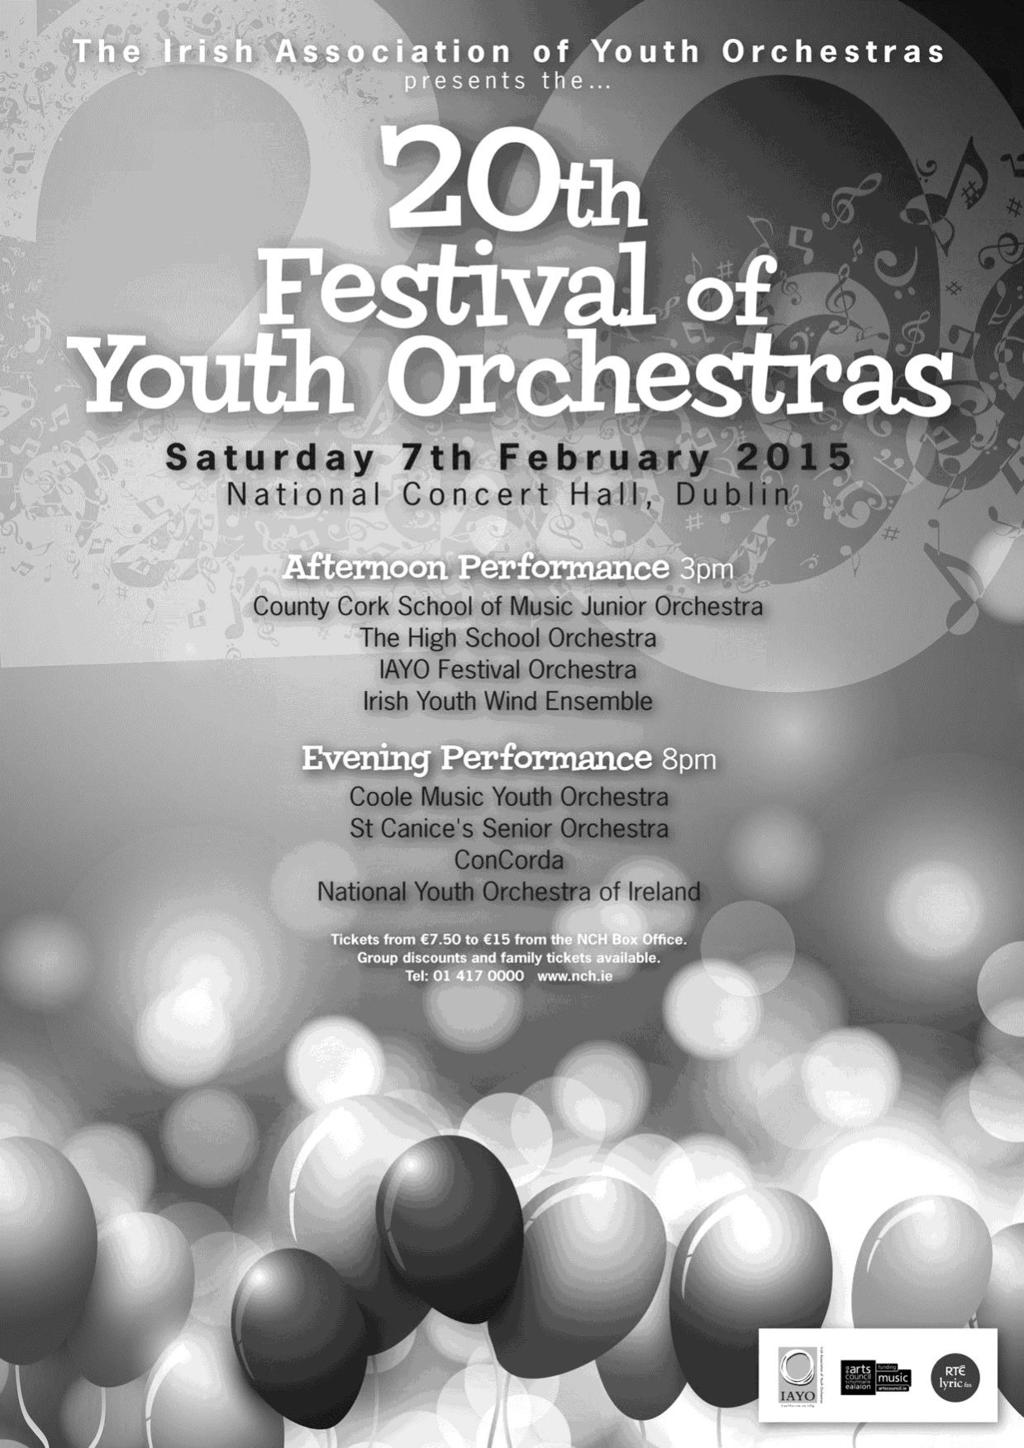 Ambassador Programme As 2015 sees the landmark 20th Festival of Youth